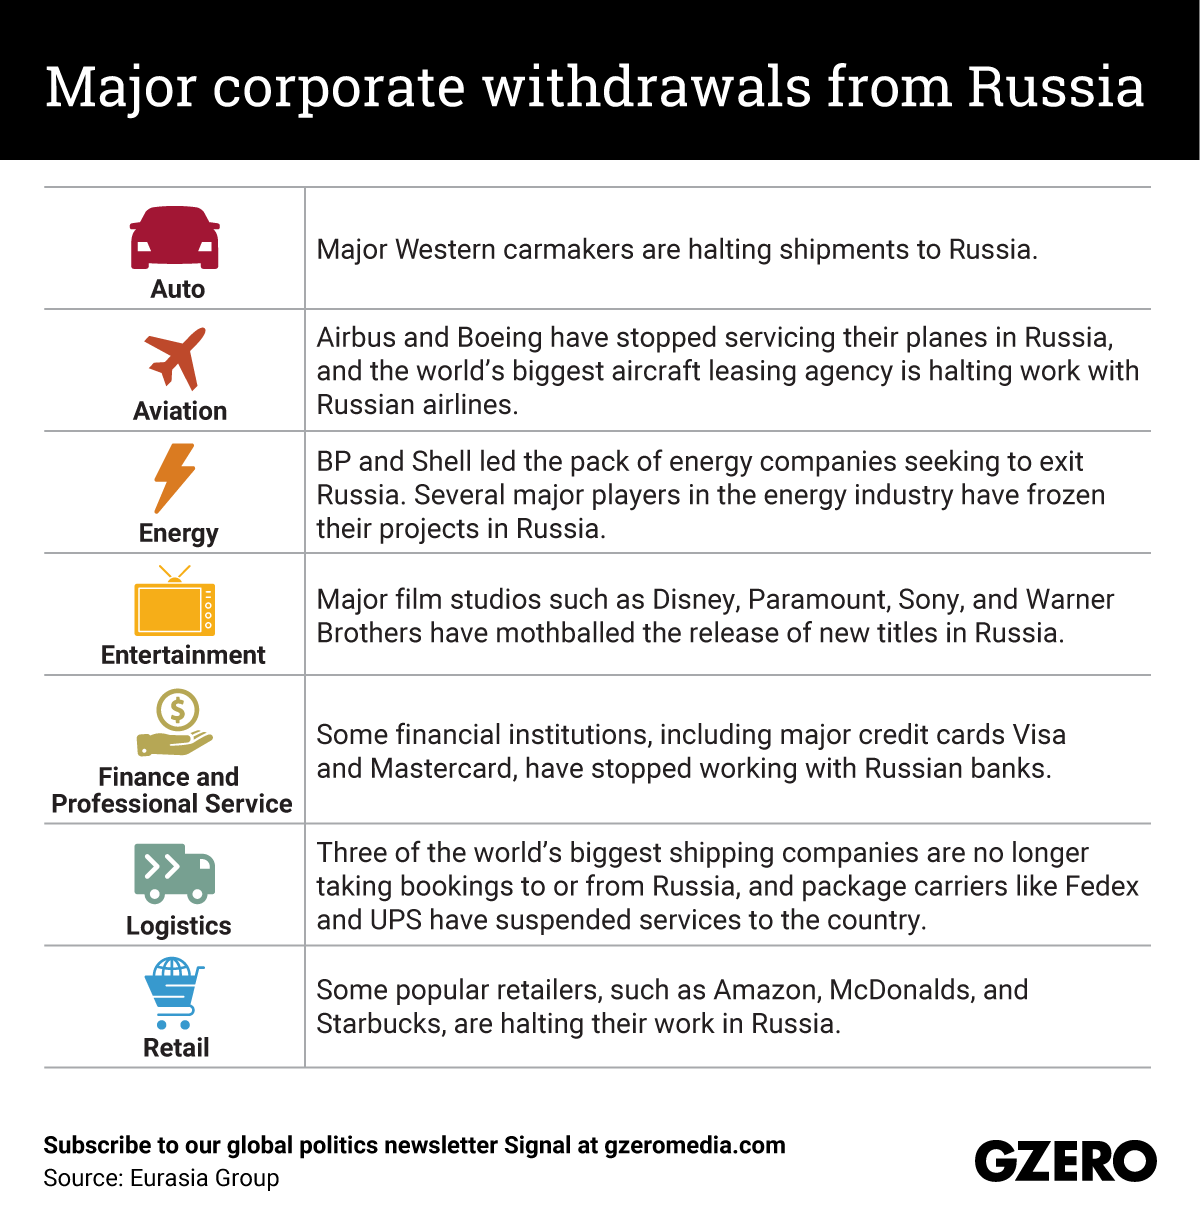 The Graphic Truth: Major corporate withdrawals from Russia